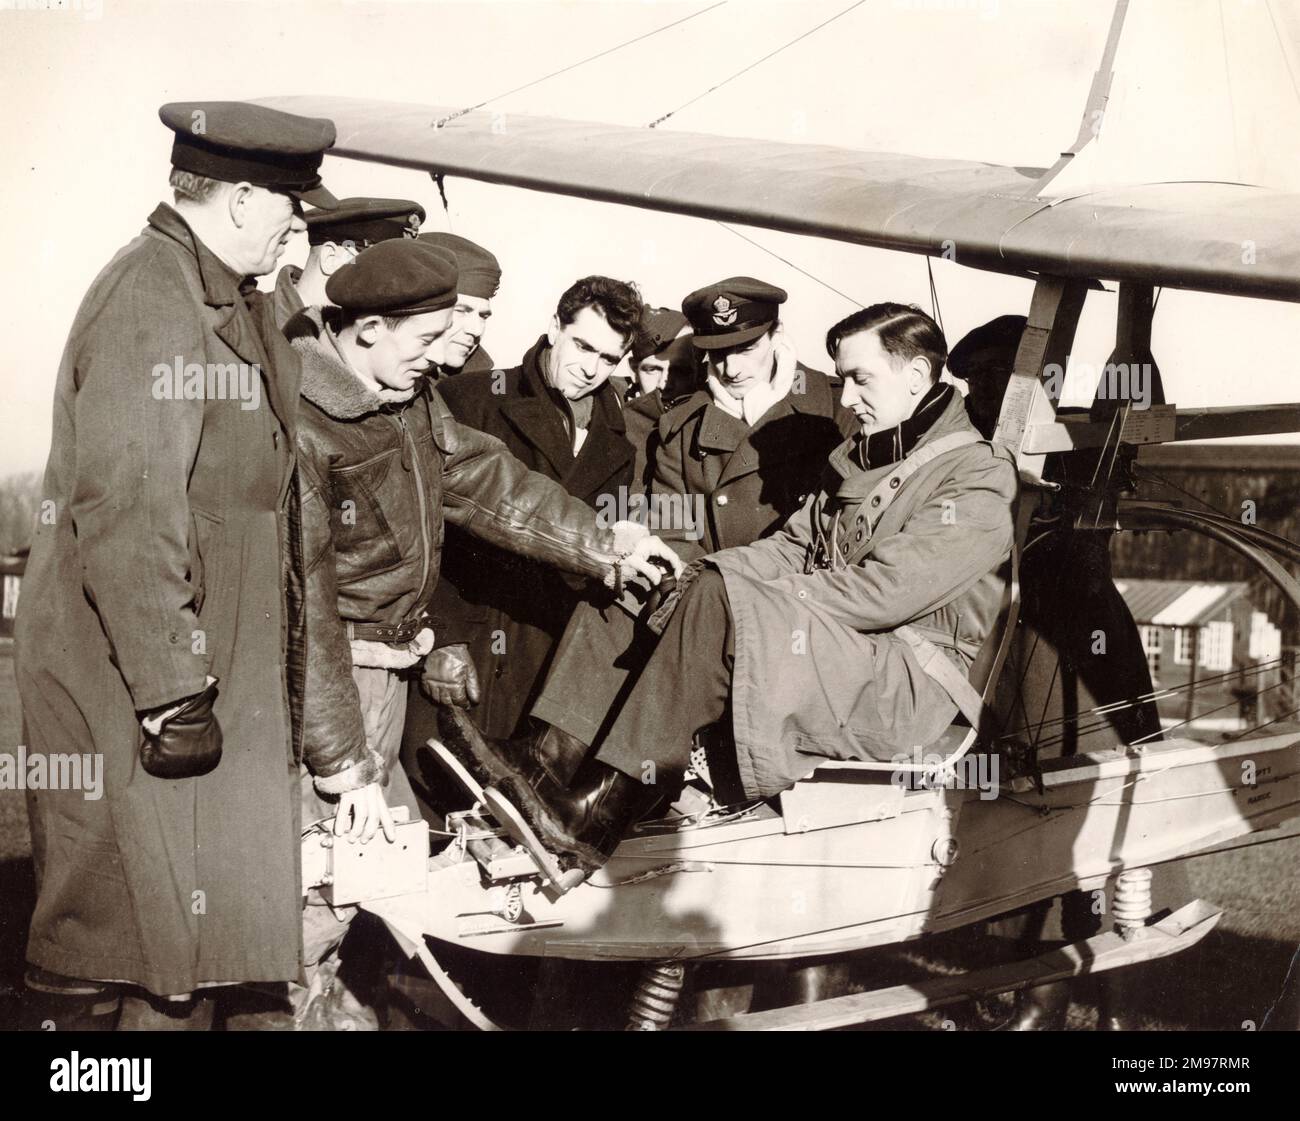 Flt Lt A.D. Piggott, Chief Instructor, with a class of schoolmasters explains the controls of a glider at Detling, near Maidstone, Kent. J.L. Smith, Chemistry Master, Dollar Academy, near Stirling, Scotland, is in the cockpit. January 1952. Stock Photo